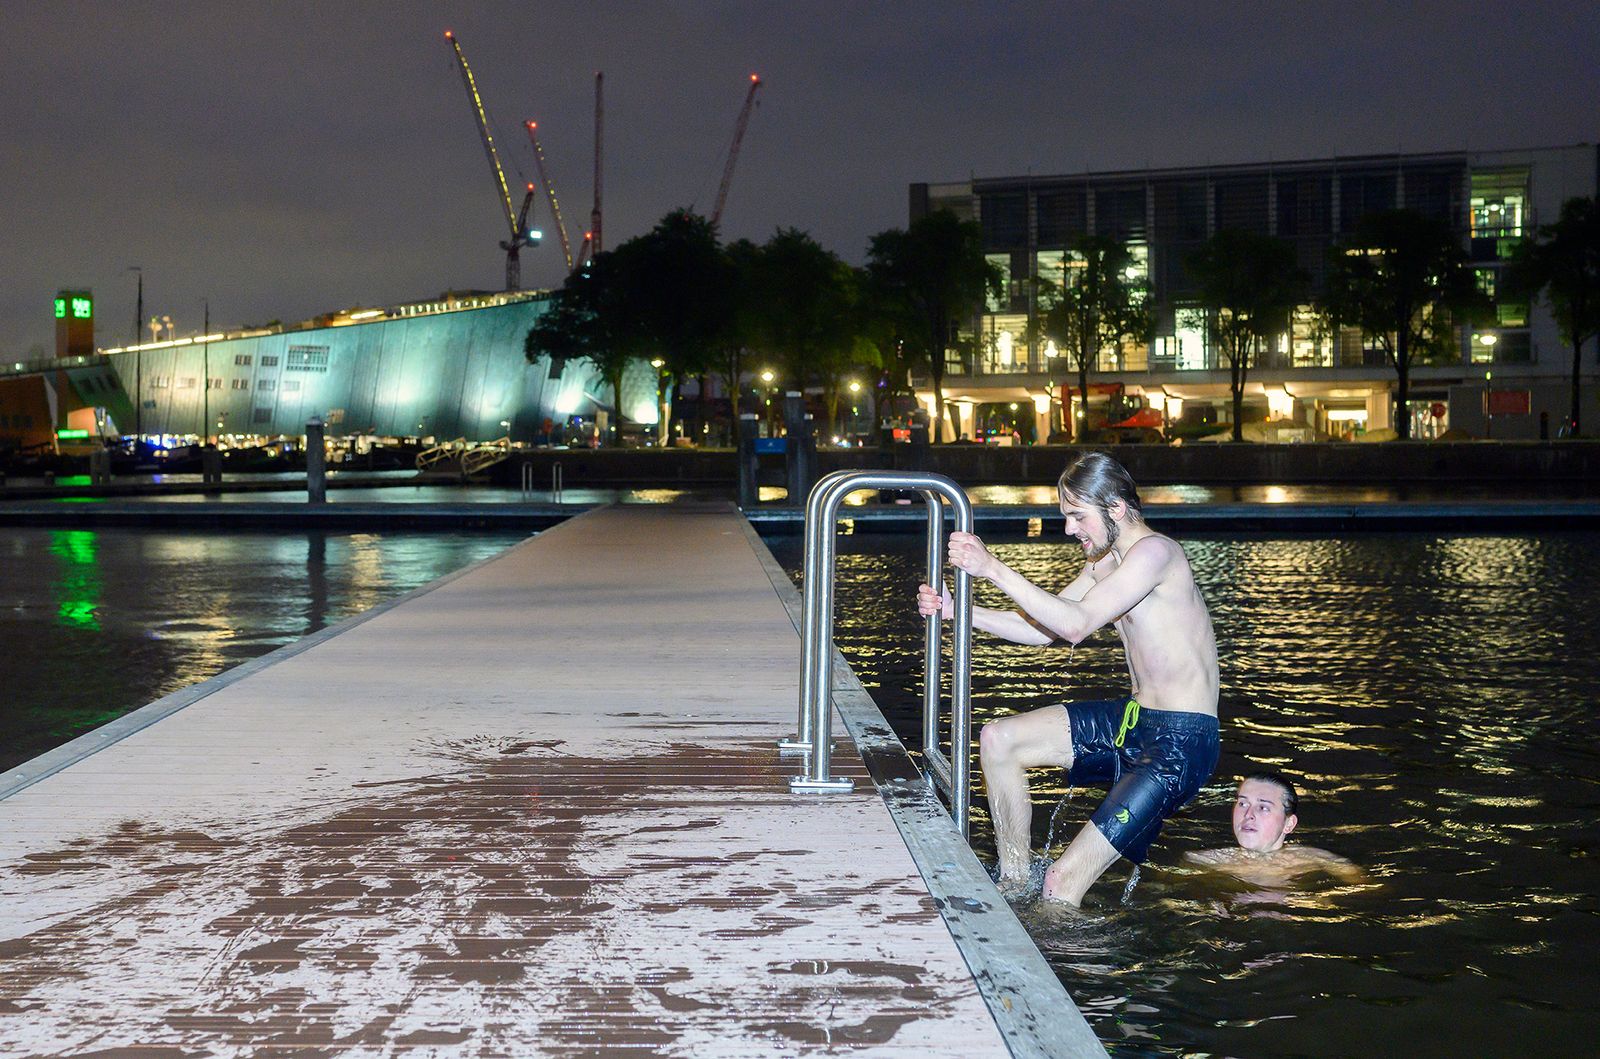 © Els Zweerink - Swimming at night in the IJ (water in Amsterdam).